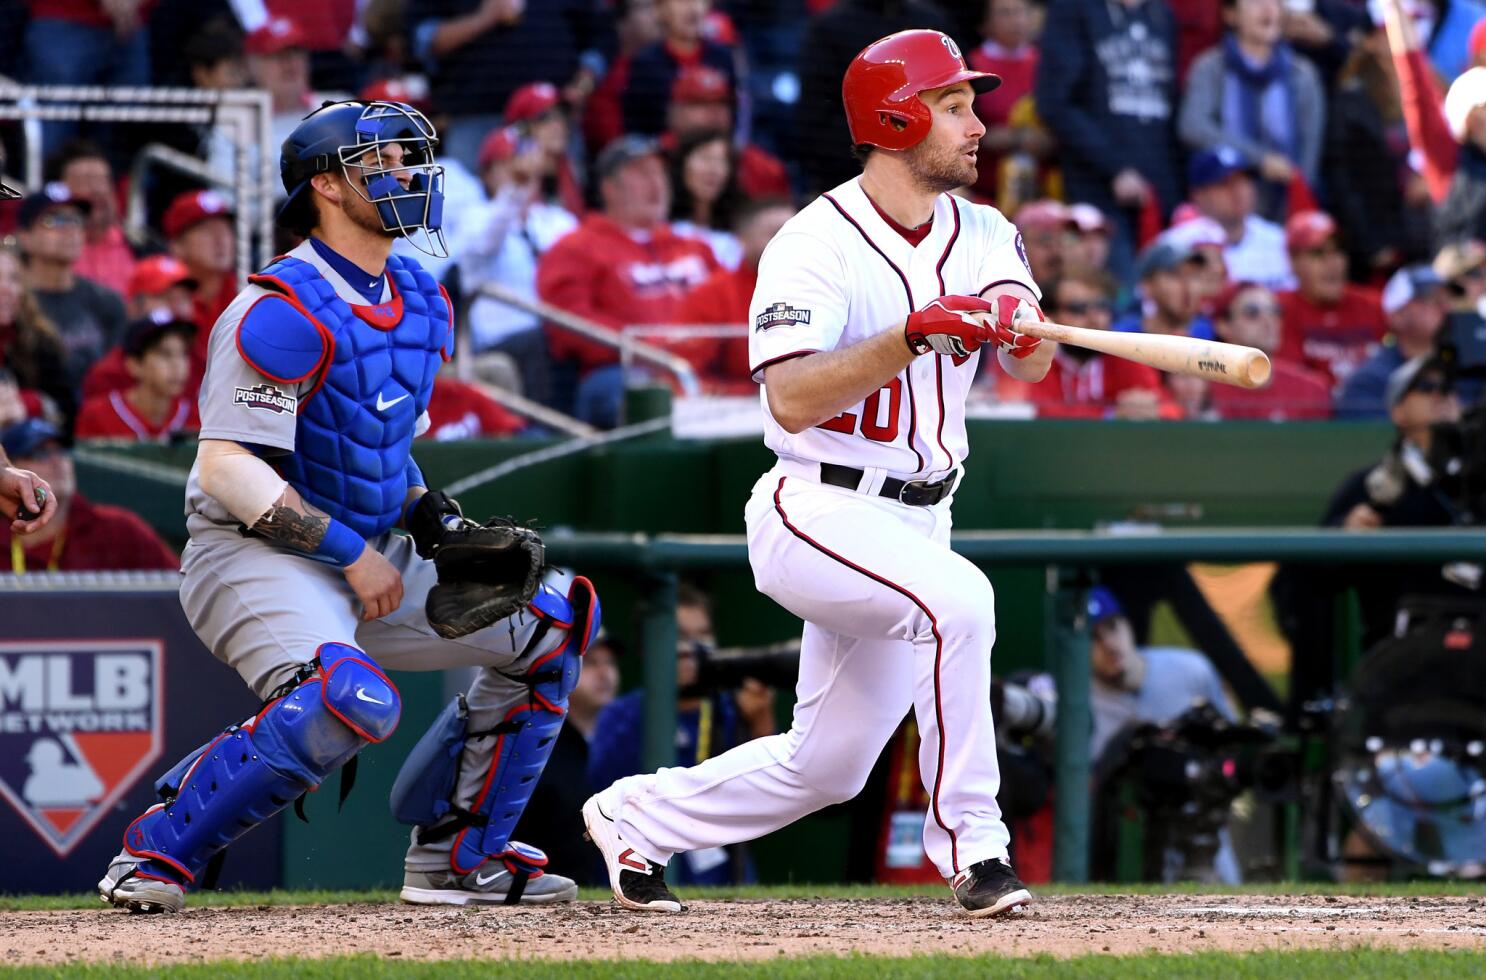 Report: Daniel Murphy to receive qualifying offer from Mets